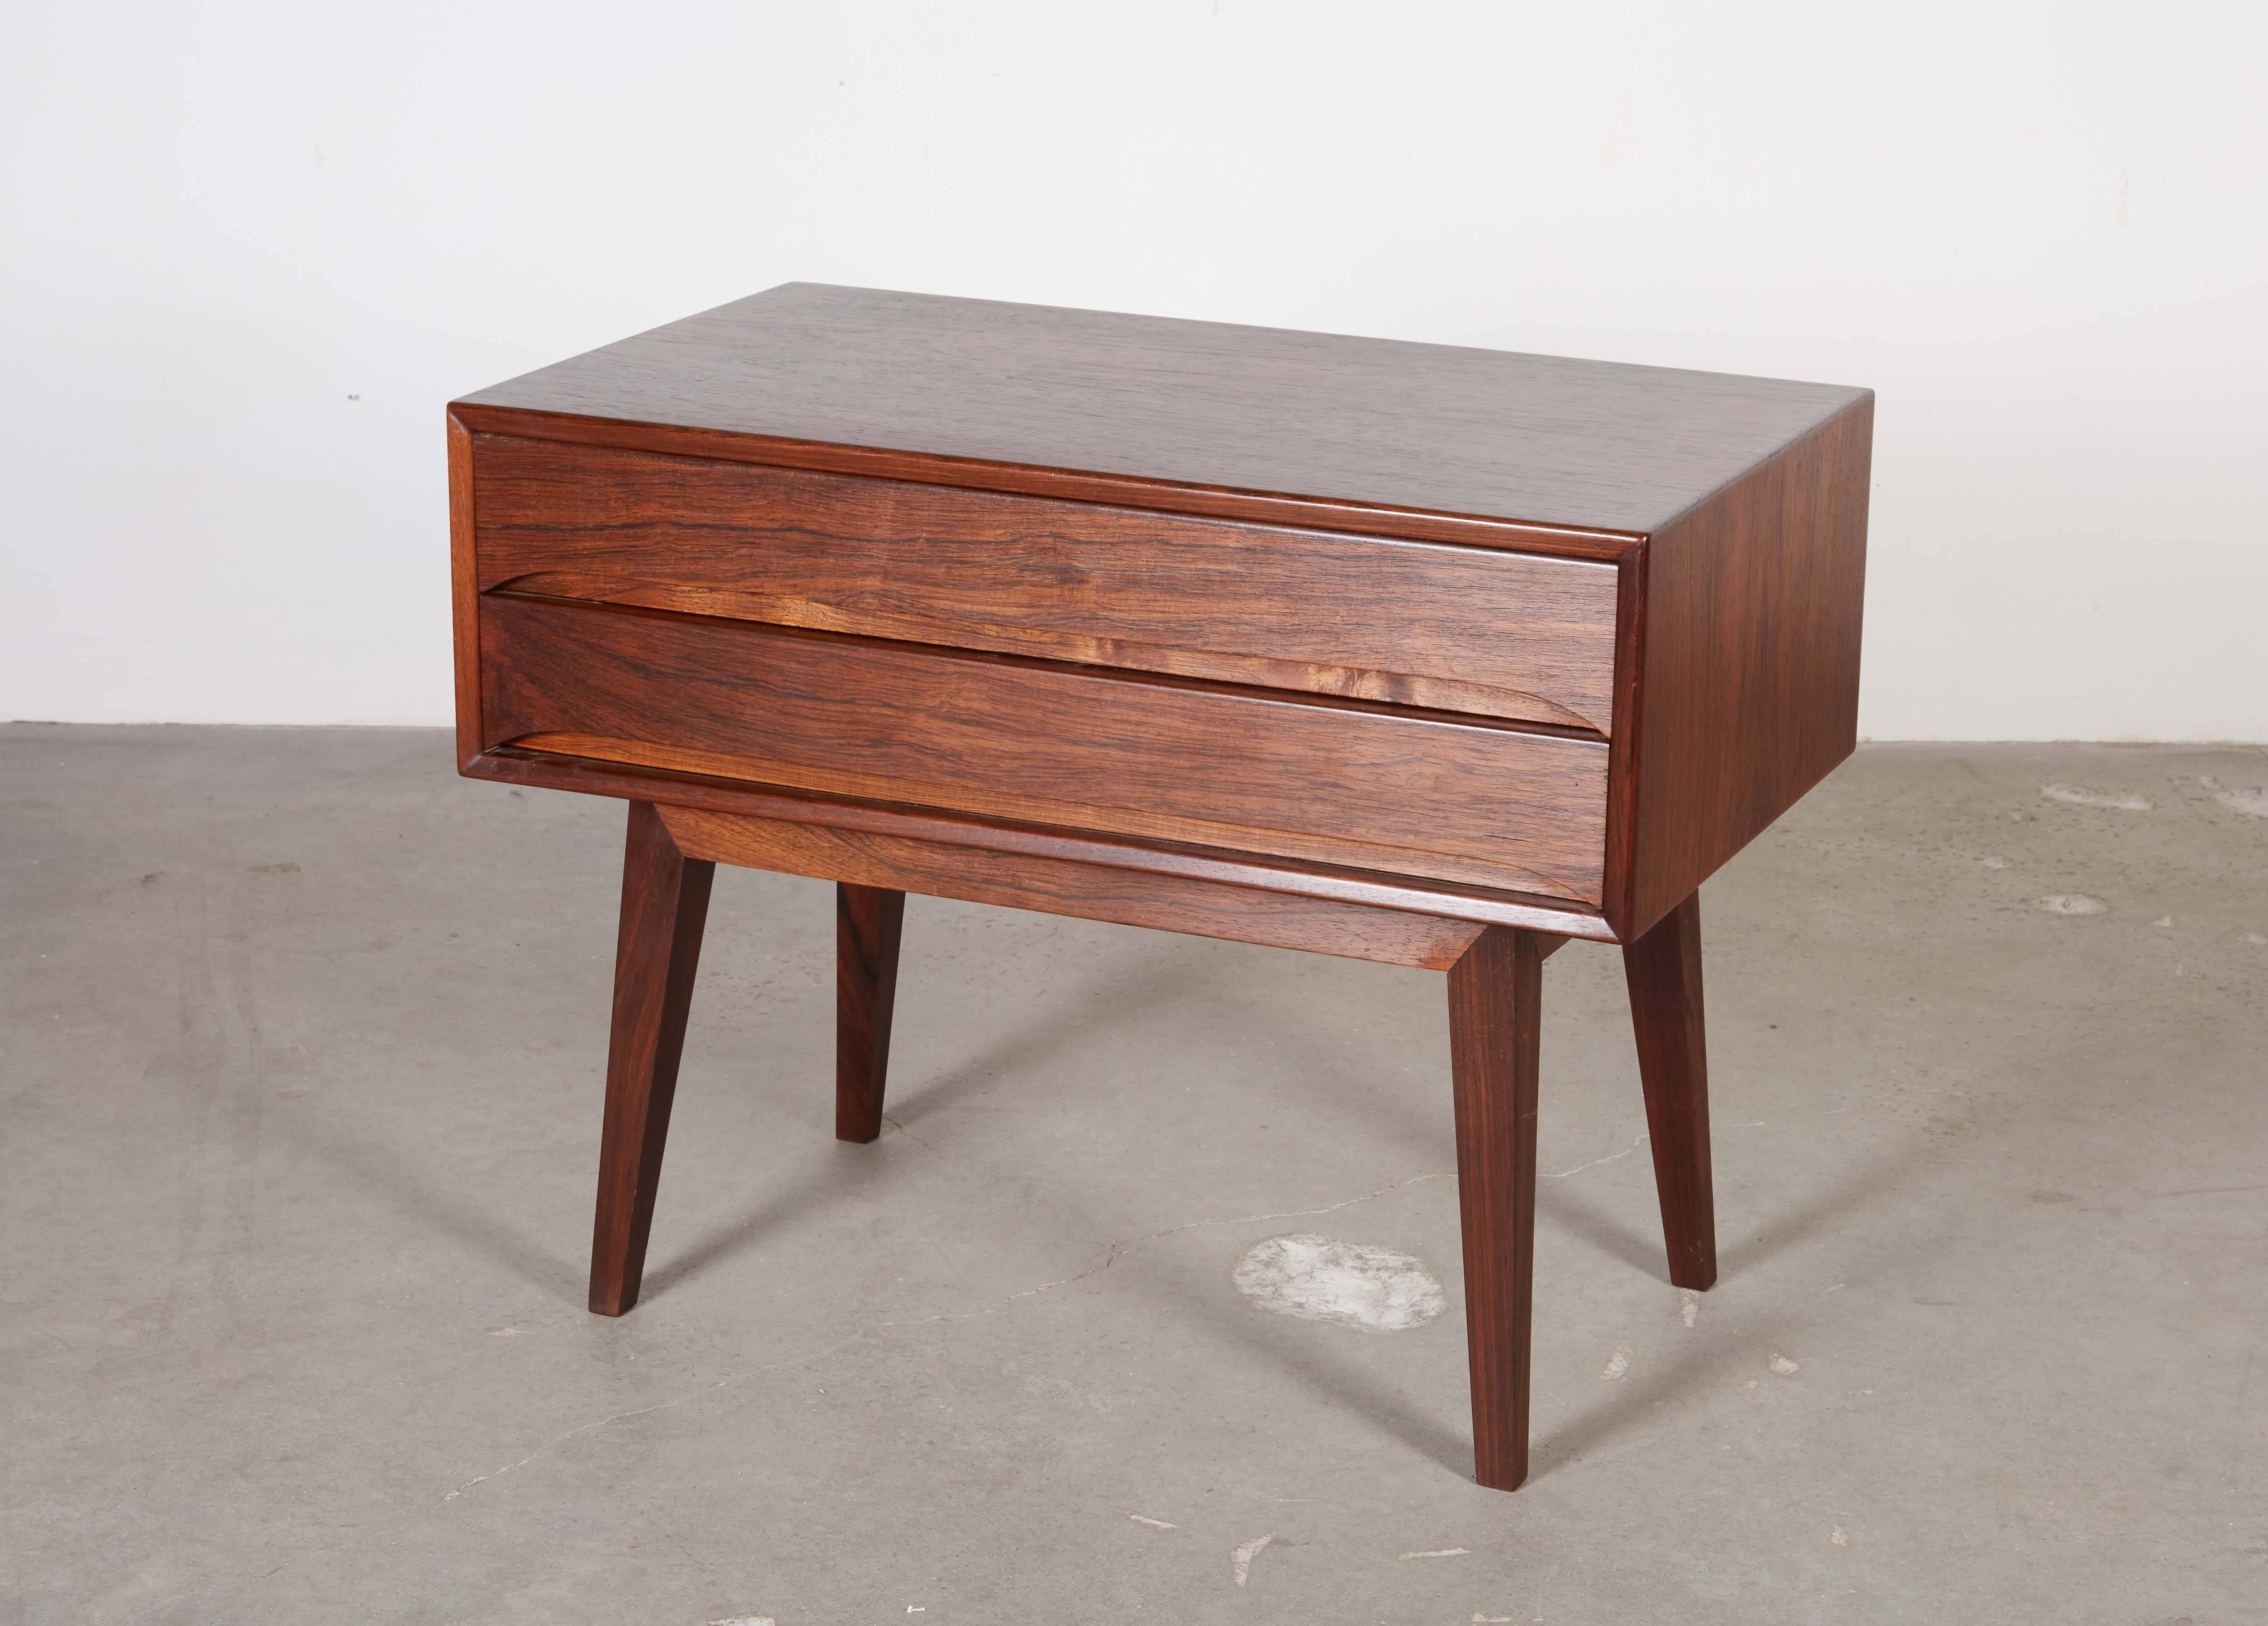 Vintage 1960s Rosewood Bedside Table

This Danish Night Stand is in excellent condition and is perfect for any small knock you need a little extra storage. Ready for pick up, delivery, or shipping anywhere in the world.